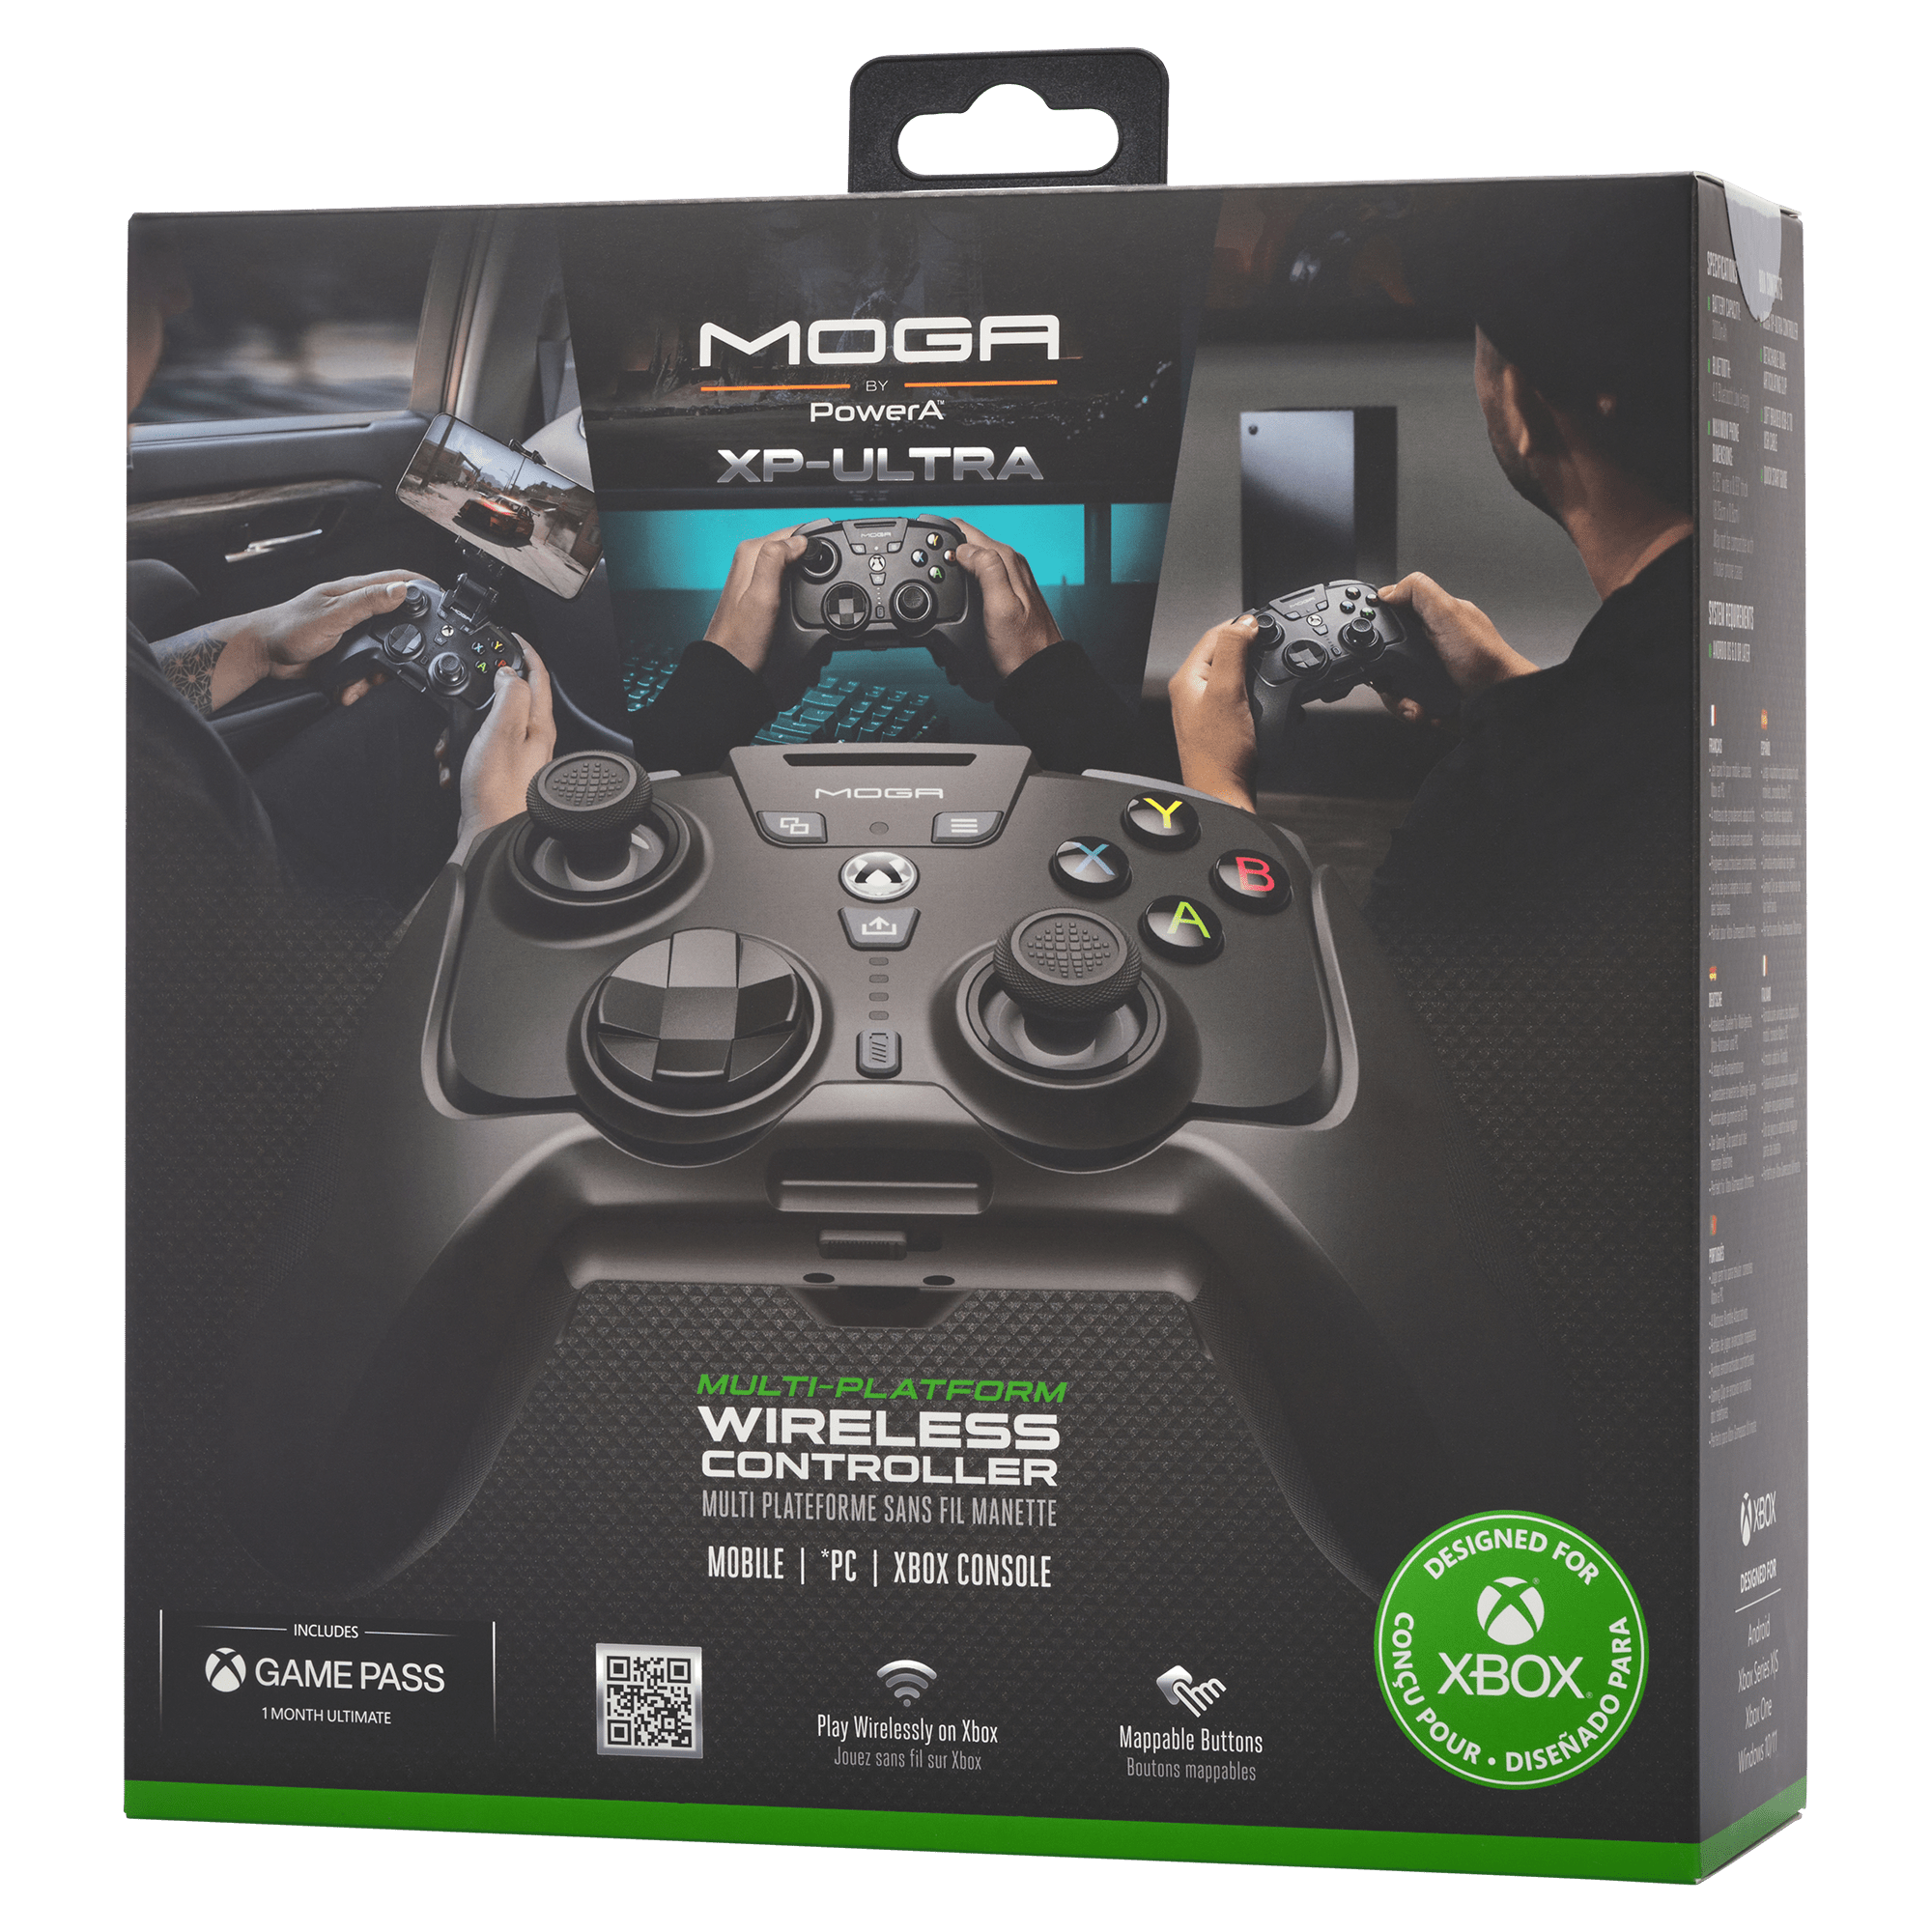 The PowerA MOGA XP-Ultra Xbox controller sure is unique, but is it worth $130?